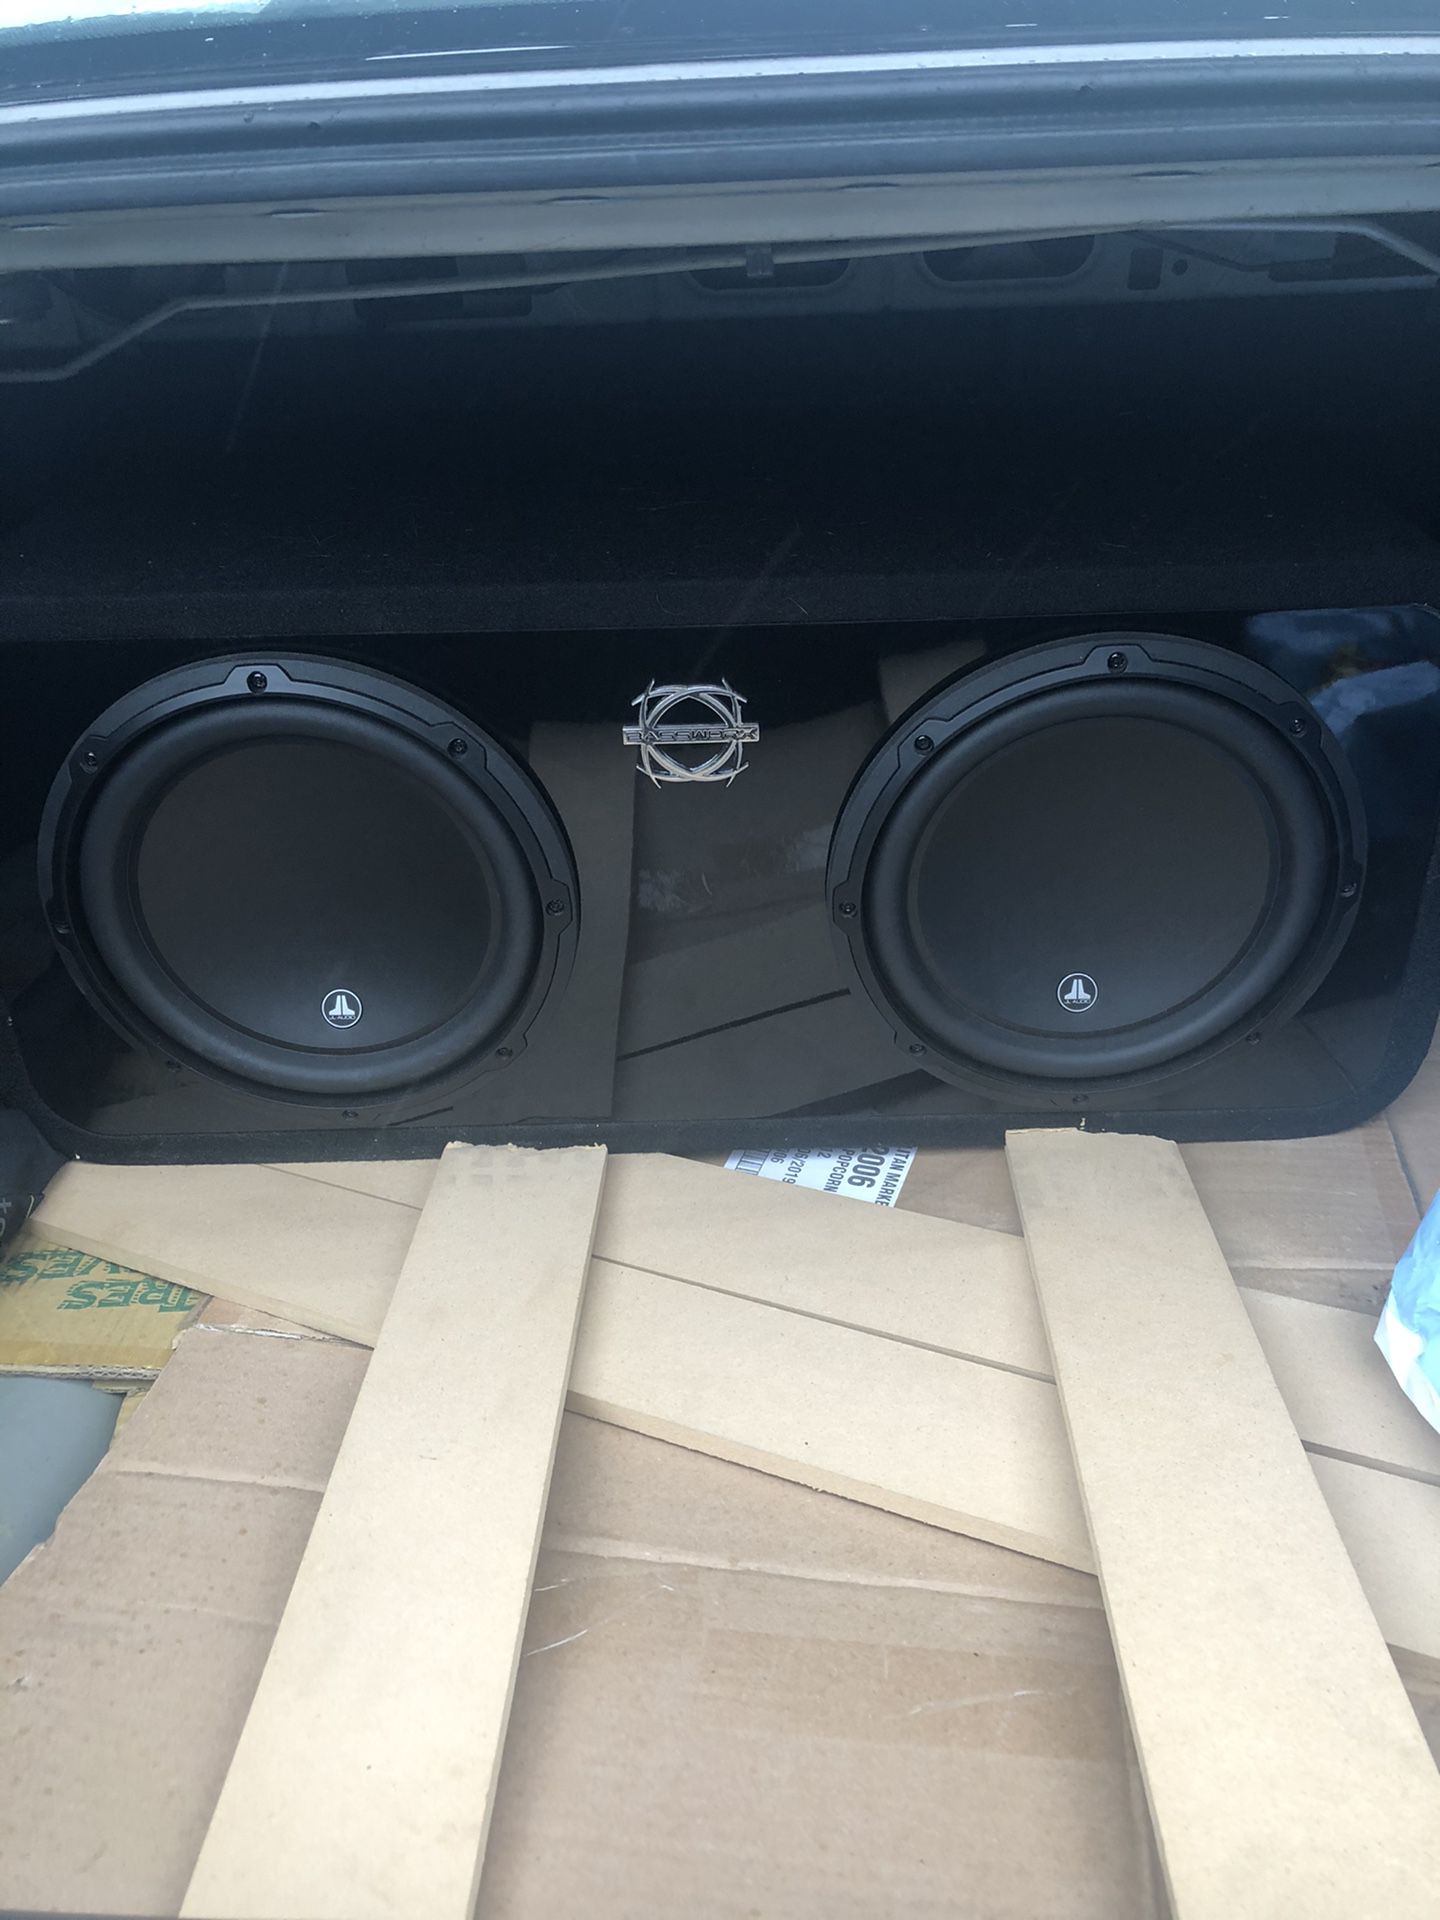 JL Audio 10” subs, amp, and box